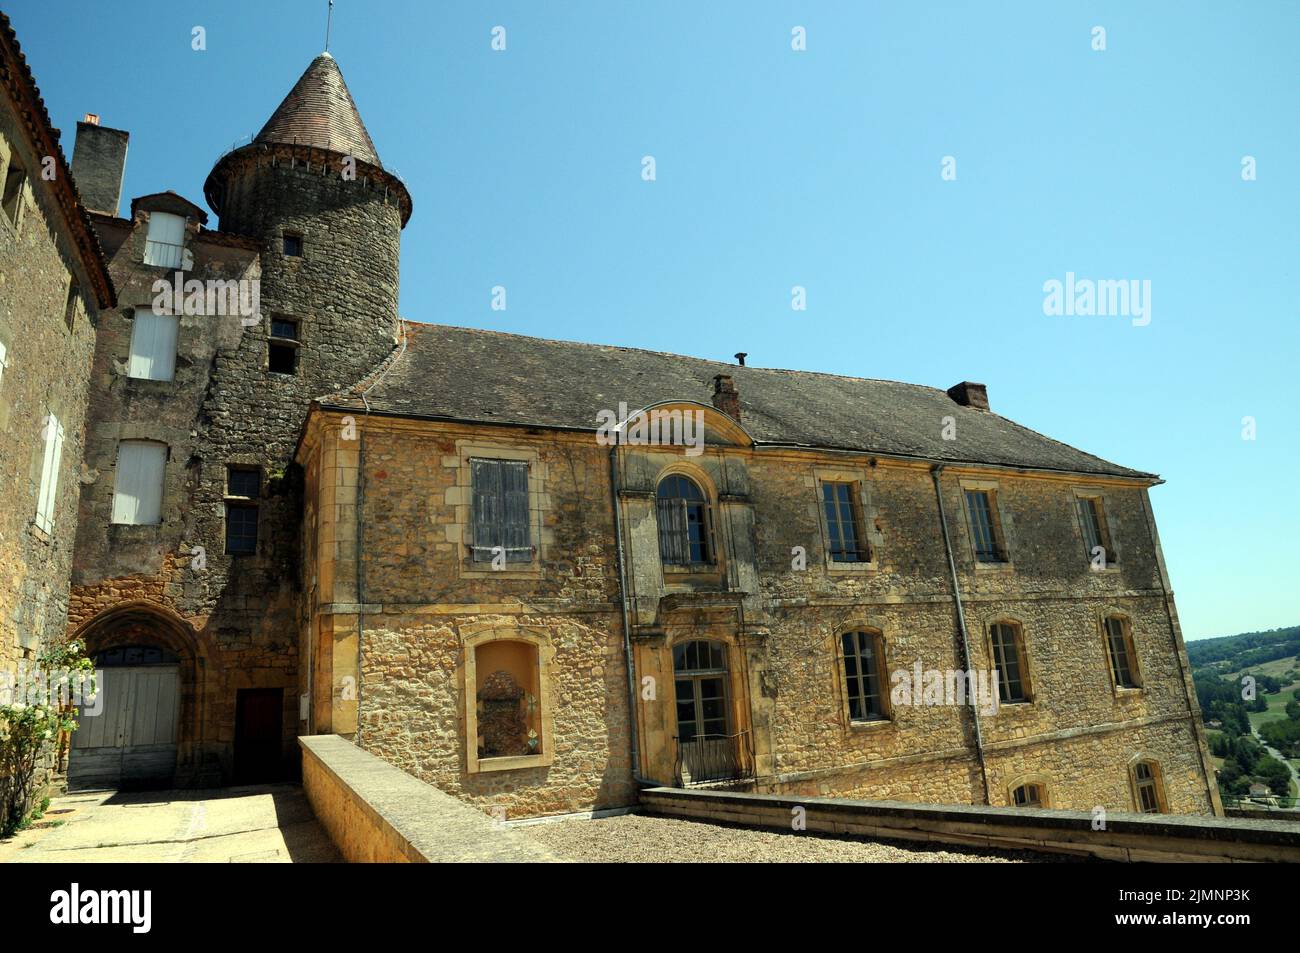 Tower at the Petit Fort in the medieval village of Belvès in the Dordogne region of France. The Petit Fort was where the original town fort stood. Stock Photo